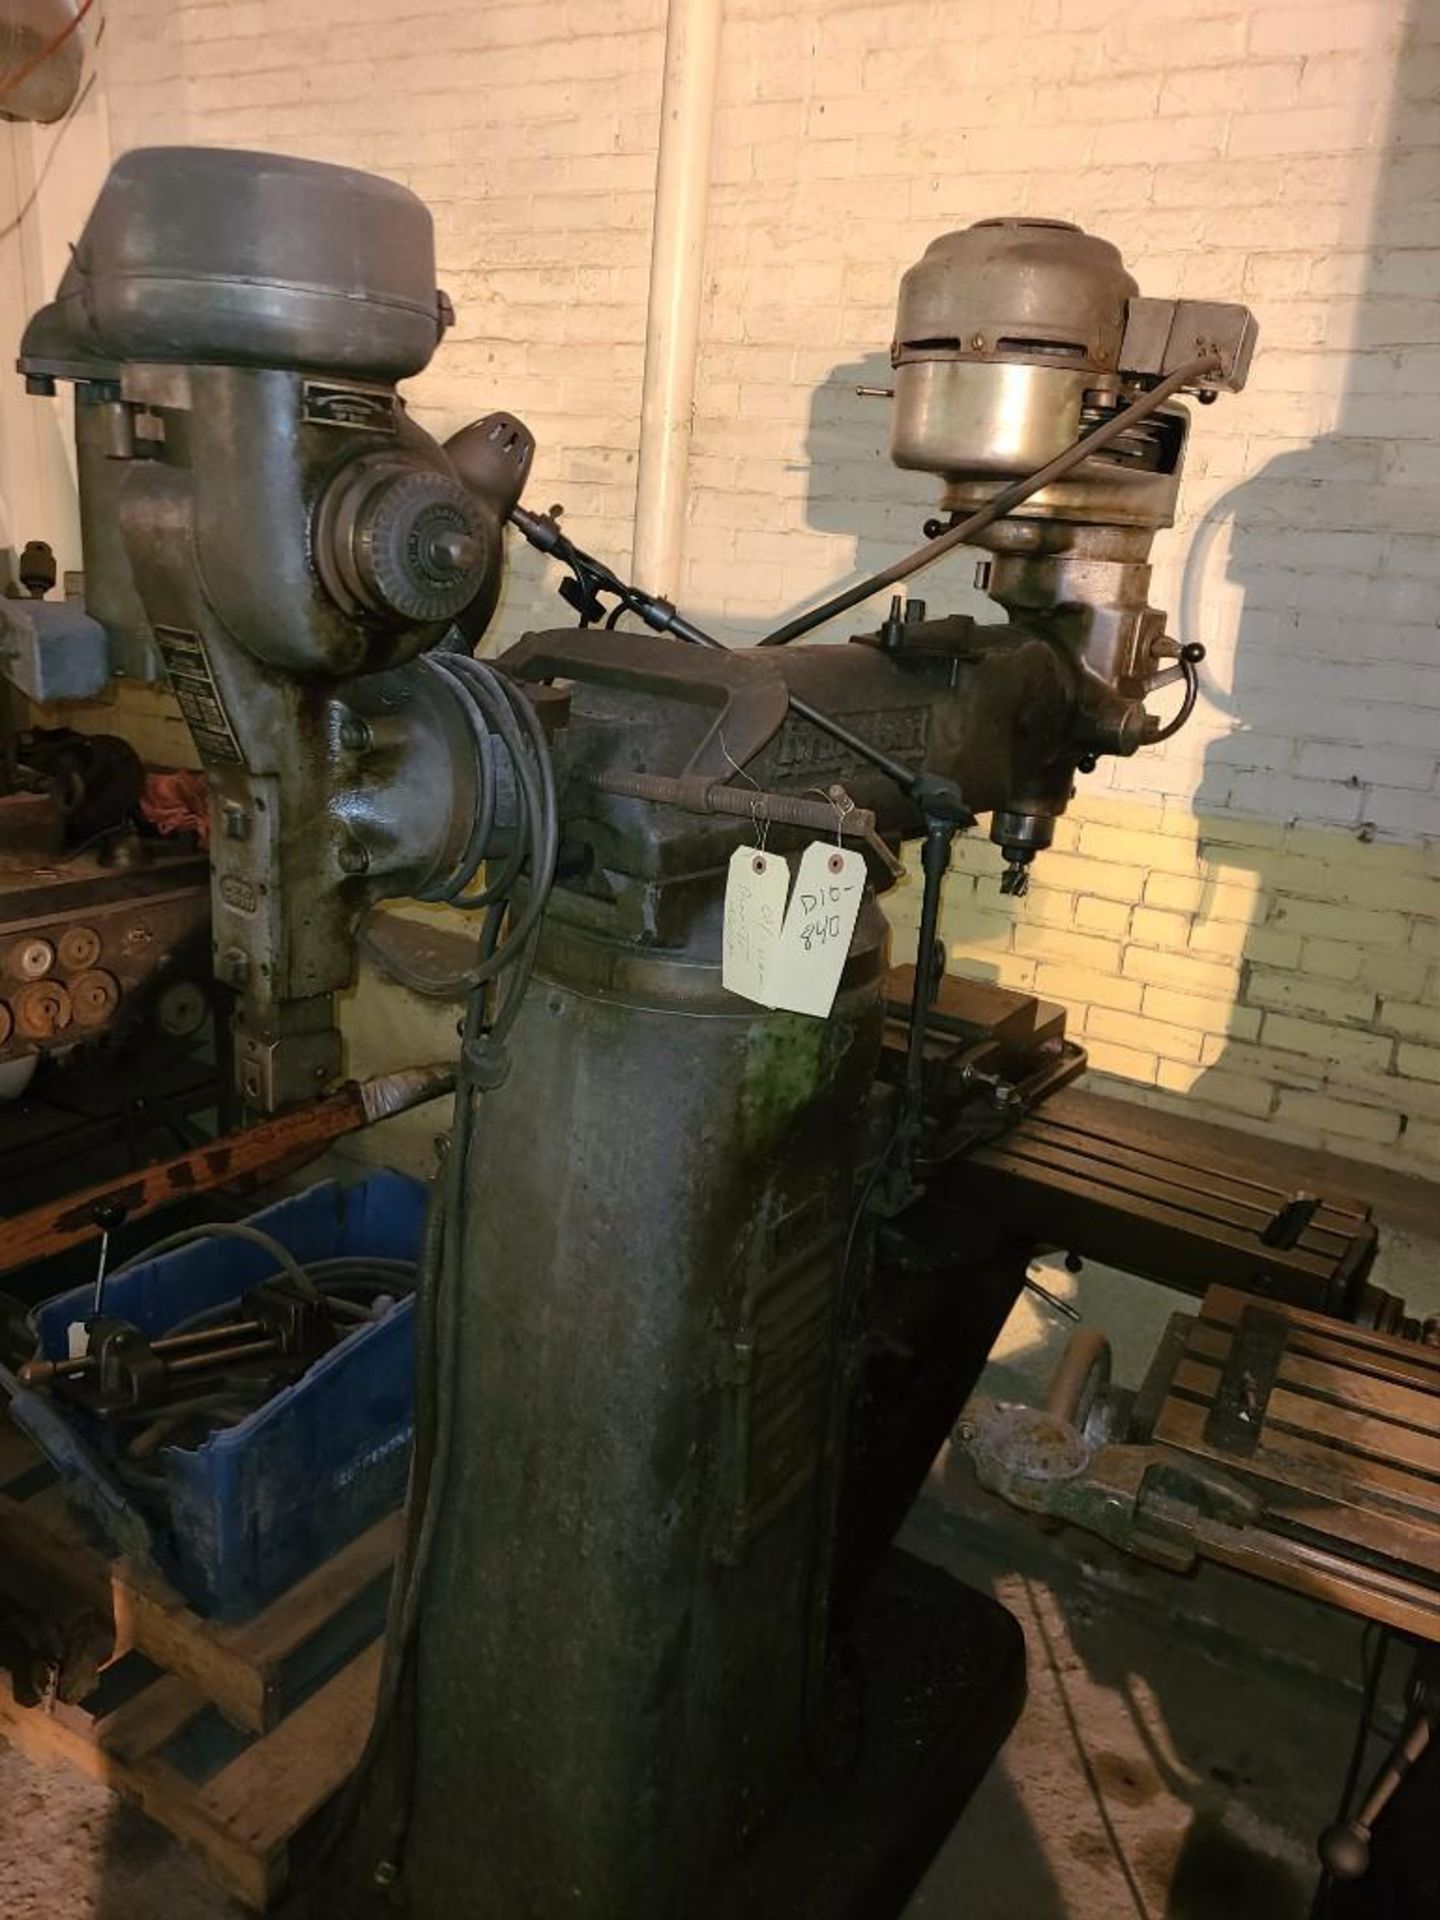 Brideport Milling Machine with Shaping Attachment